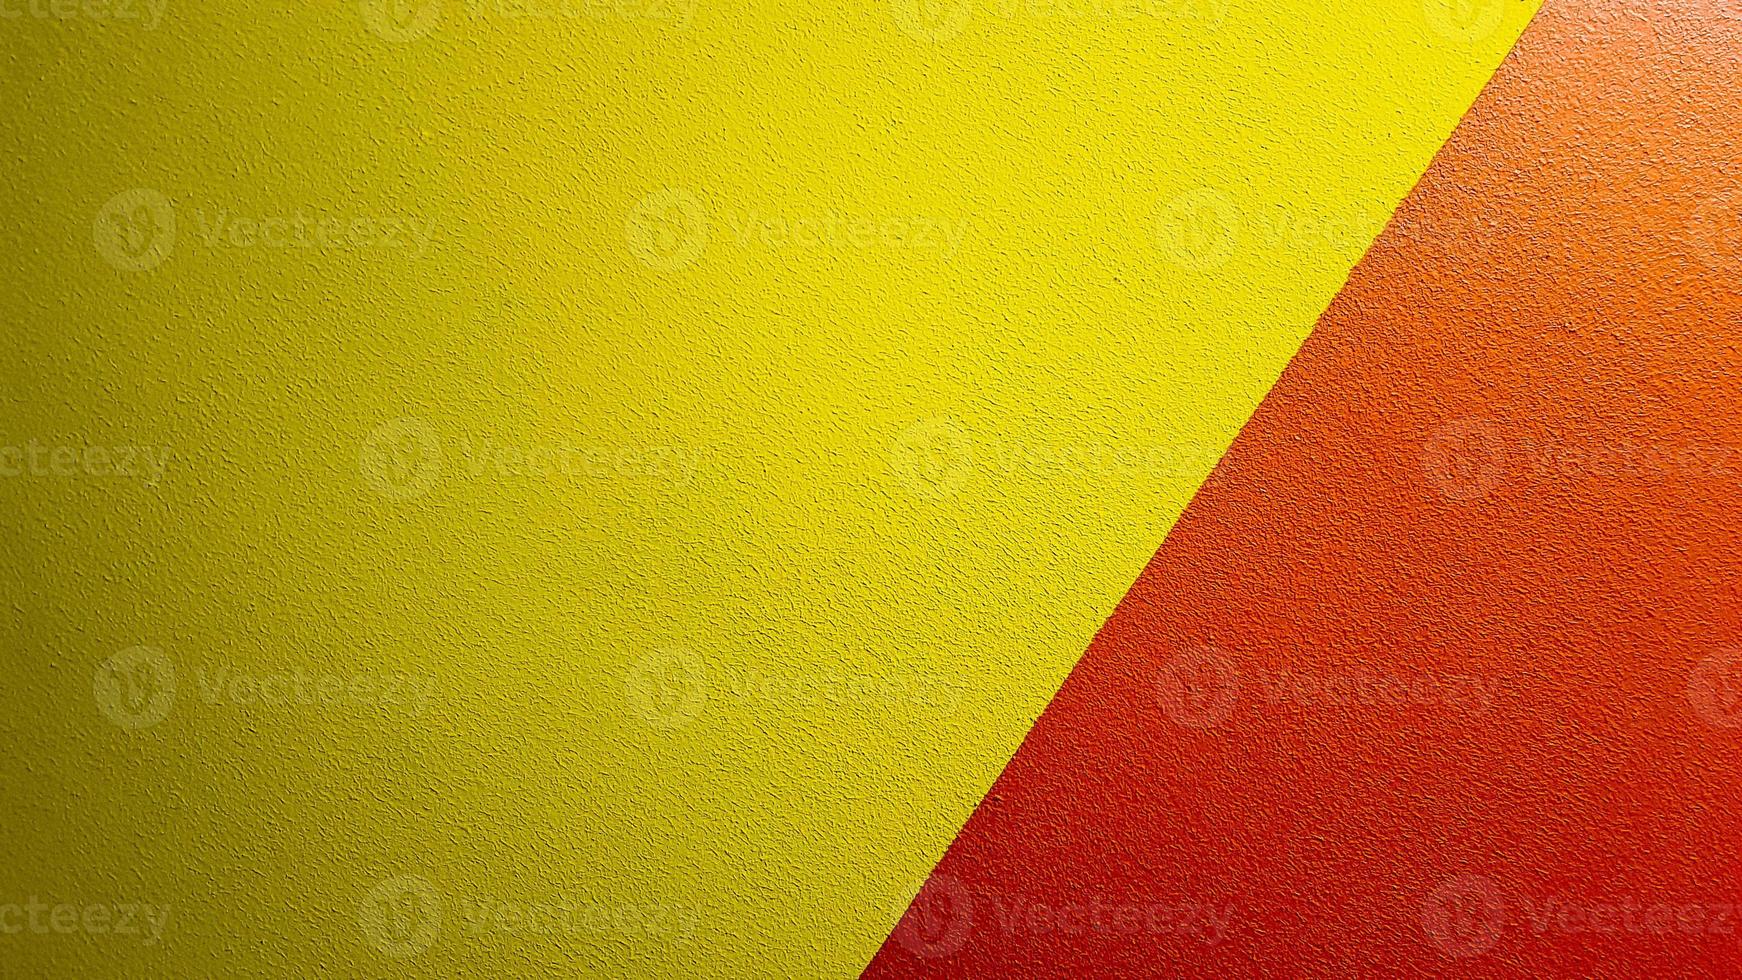 Red and yellow painted wall texture abstract grunge background with copy space. Abstract geometric pattern on the wall. The wall is divided into borders of different colors photo